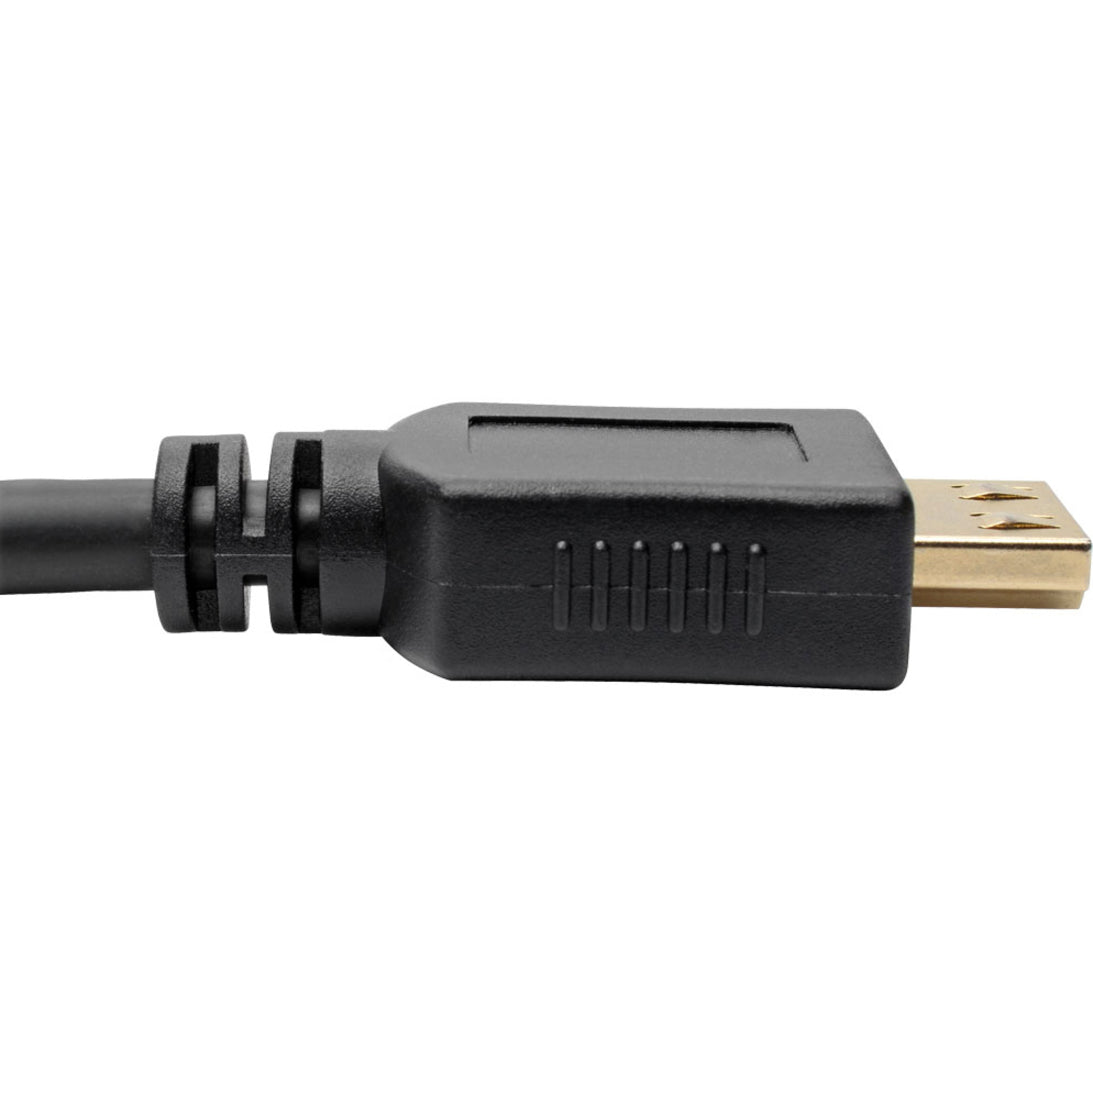 Tripp Lite P568-035-BK-GRP High-Speed HDMI Cable, 35 ft., with Gripping Connectors, Black